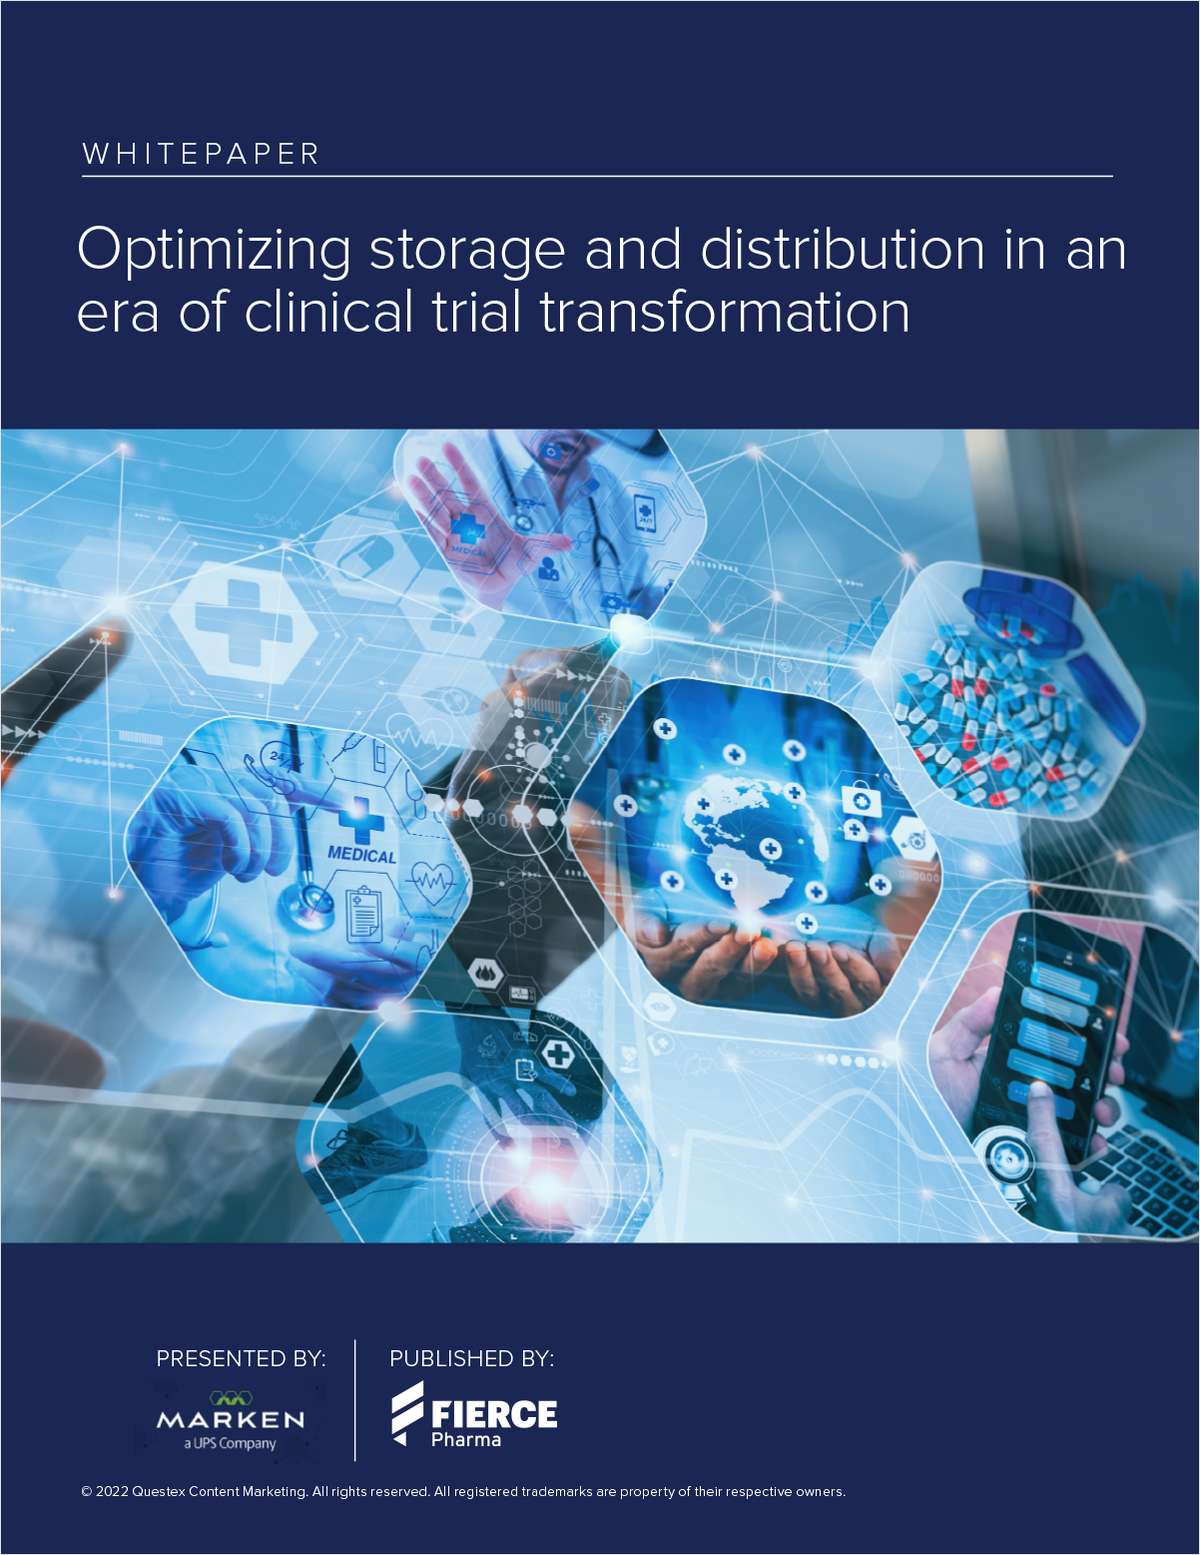 Optimizing storage and distribution in an era of clinical trial transformation